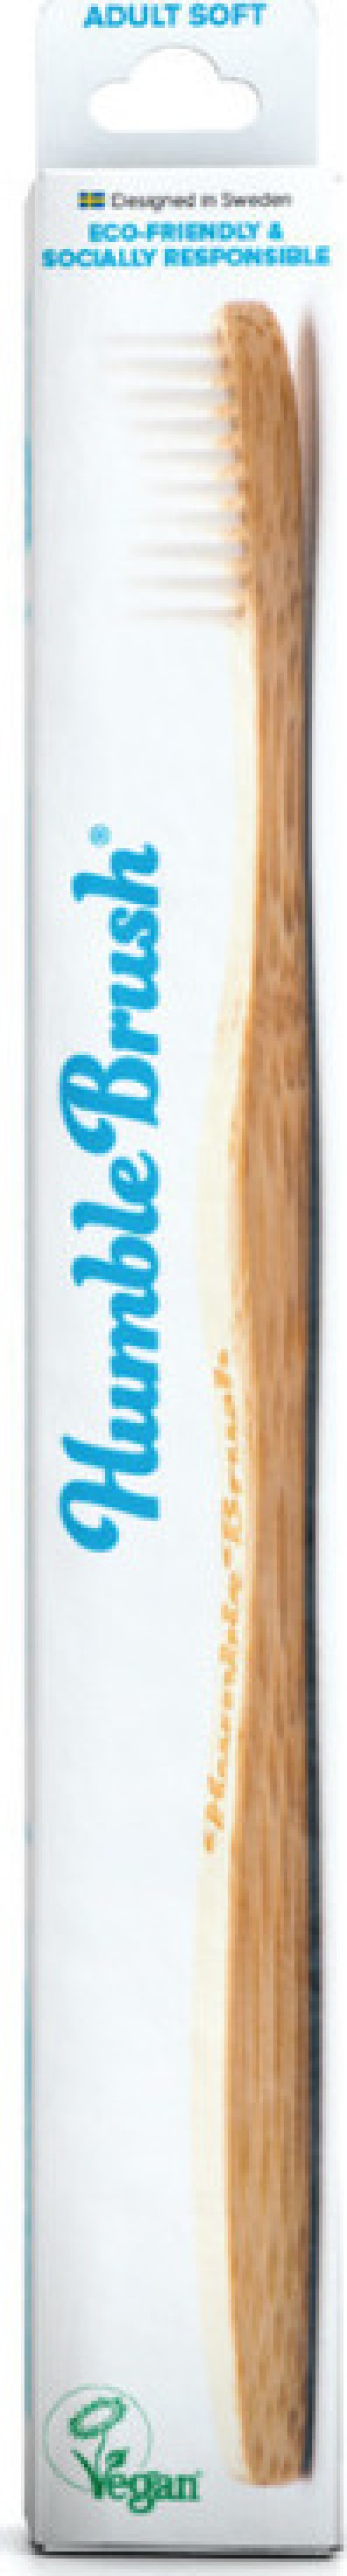 The Humble Co. Toothbrush Bamboo White Λευκή Οδοντόβουρτσα Απο Μπαμπού Adult Soft 1 τμχ product photo